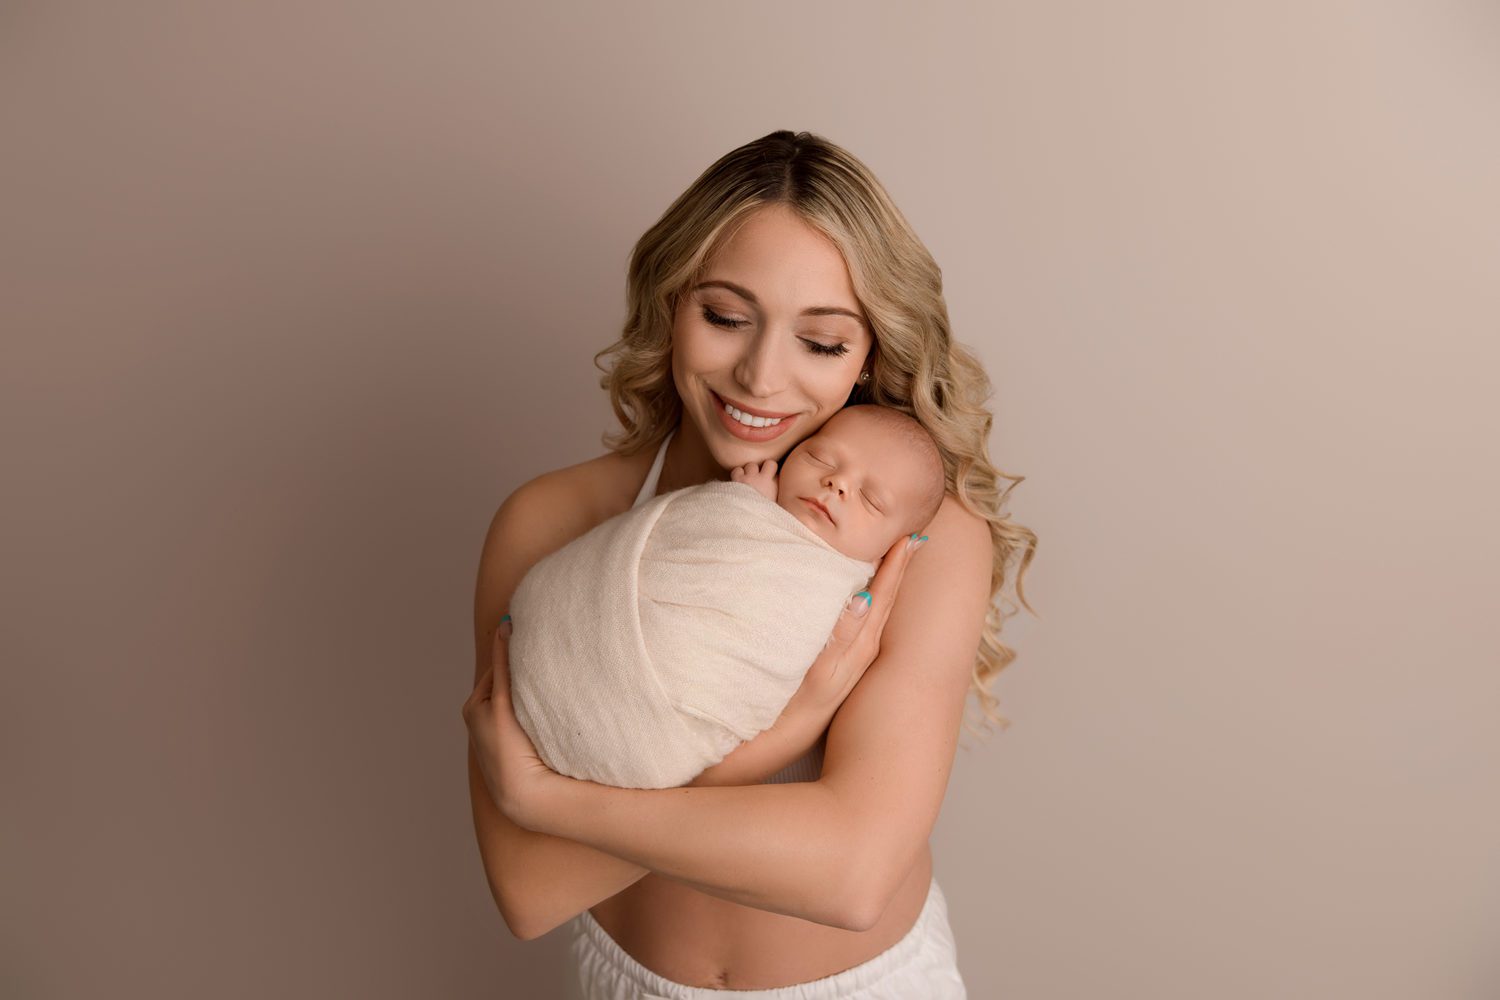 top 8 tips for a successful newborn session -newborn being held by mum on cream backdrop. mum smiling.